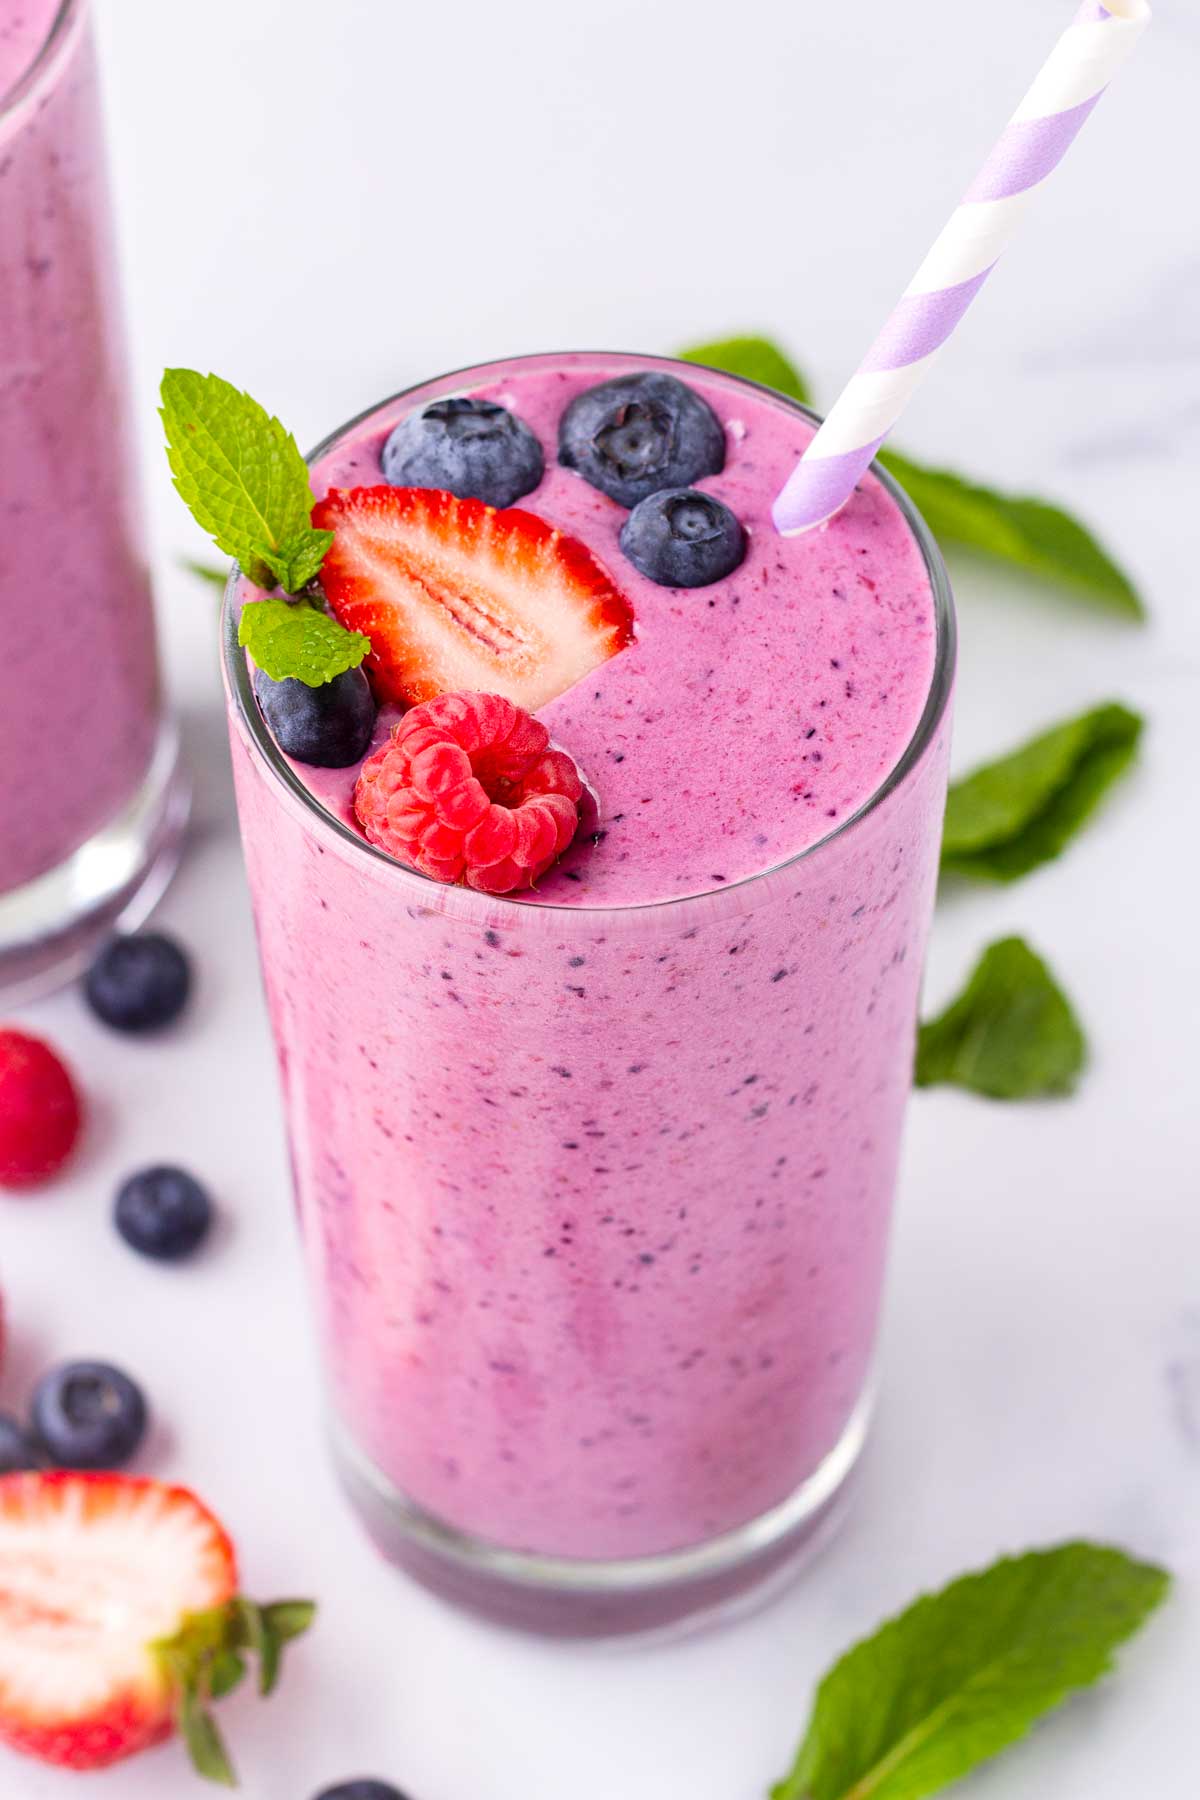 https://cookingformysoul.com/wp-content/uploads/2022/05/mixed-berry-smoothie-3-min.jpg